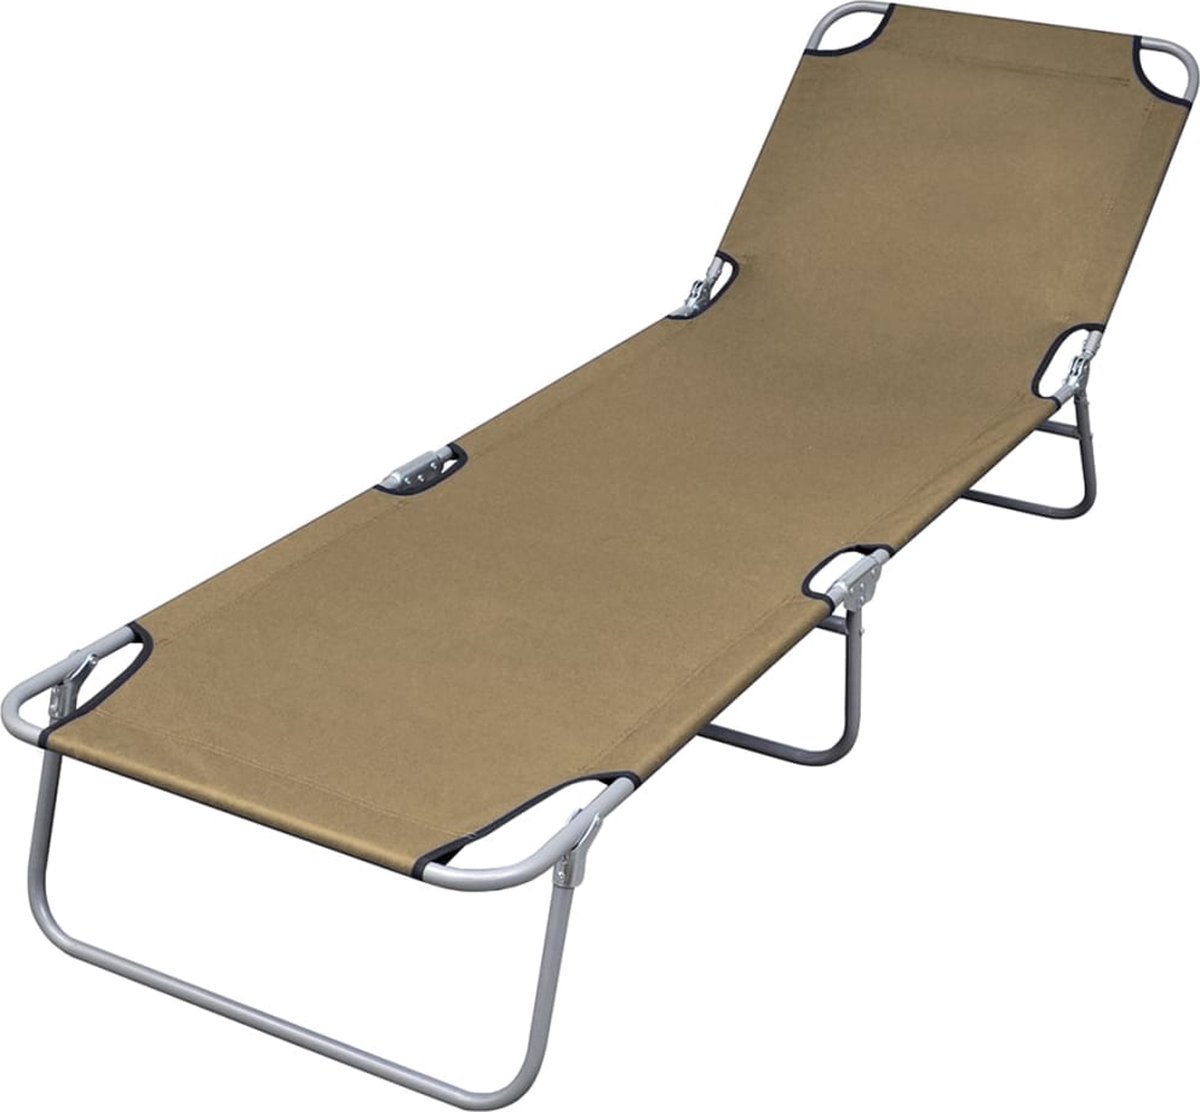 The Living Store Inklapbaar Ligbed - Campingbed - 189x58x27cm - Taupe